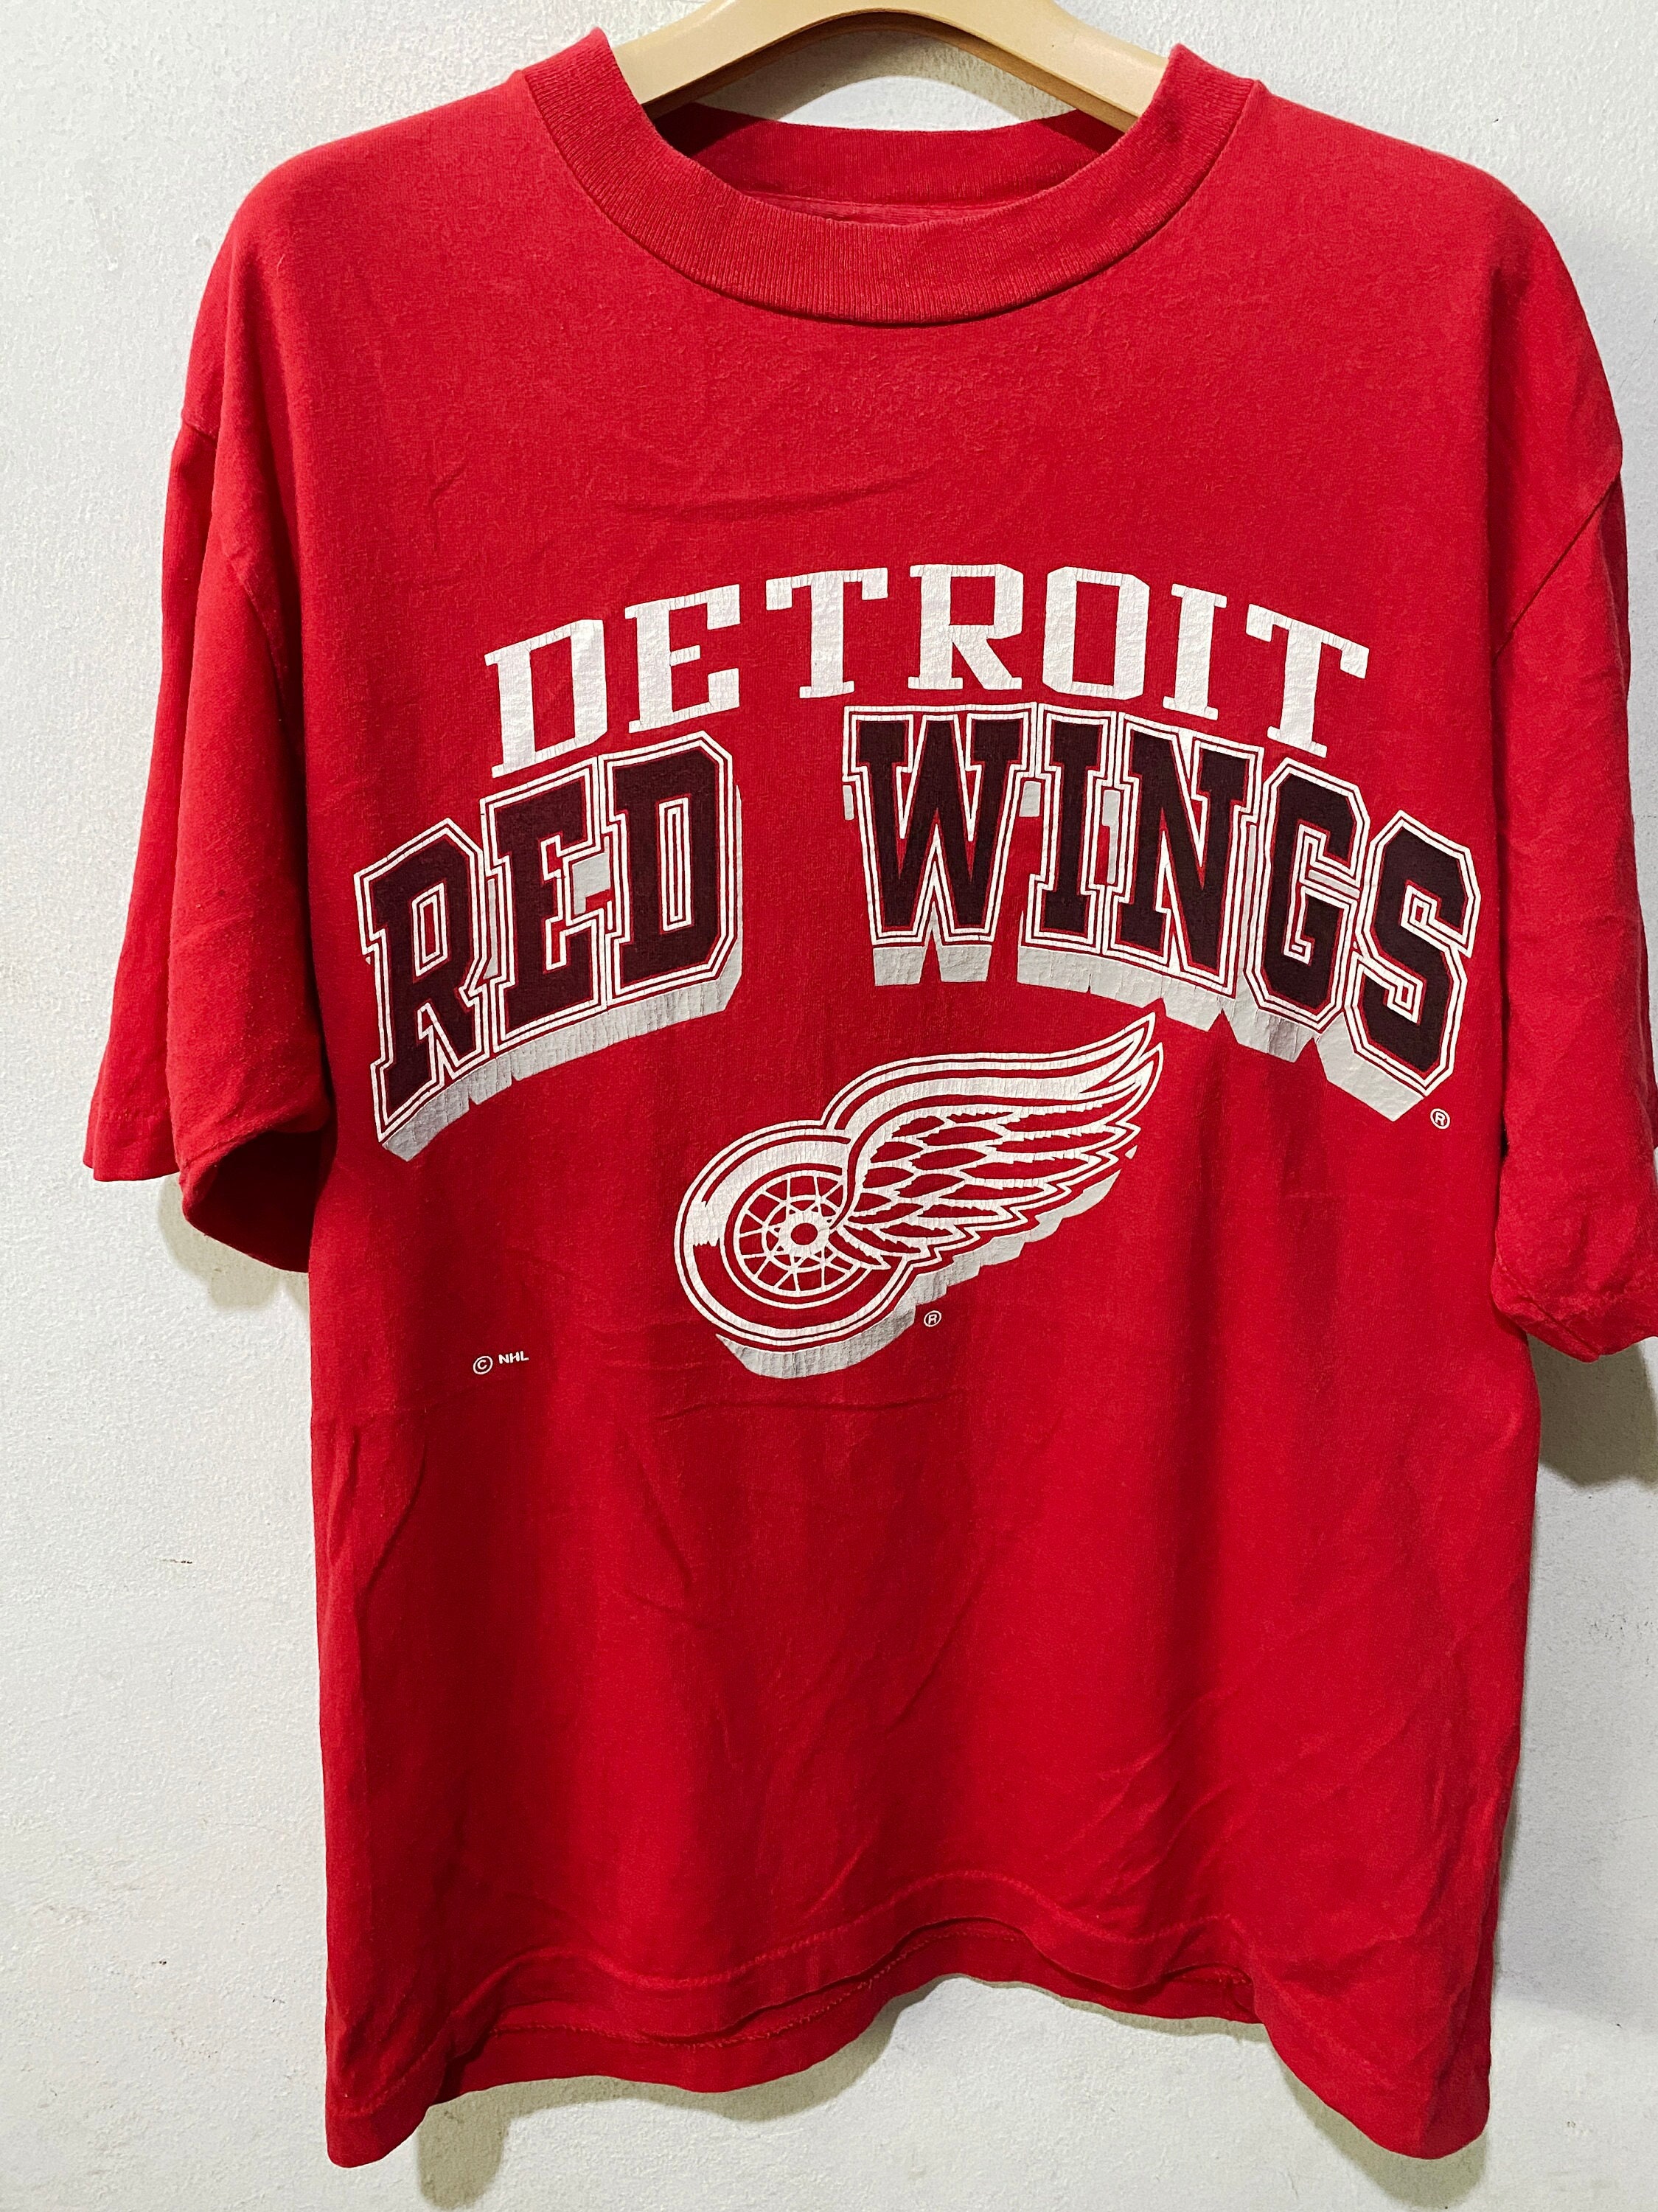 1980s Detroit Red Wings T-Shirt by Screen Stars – Red Vintage Co